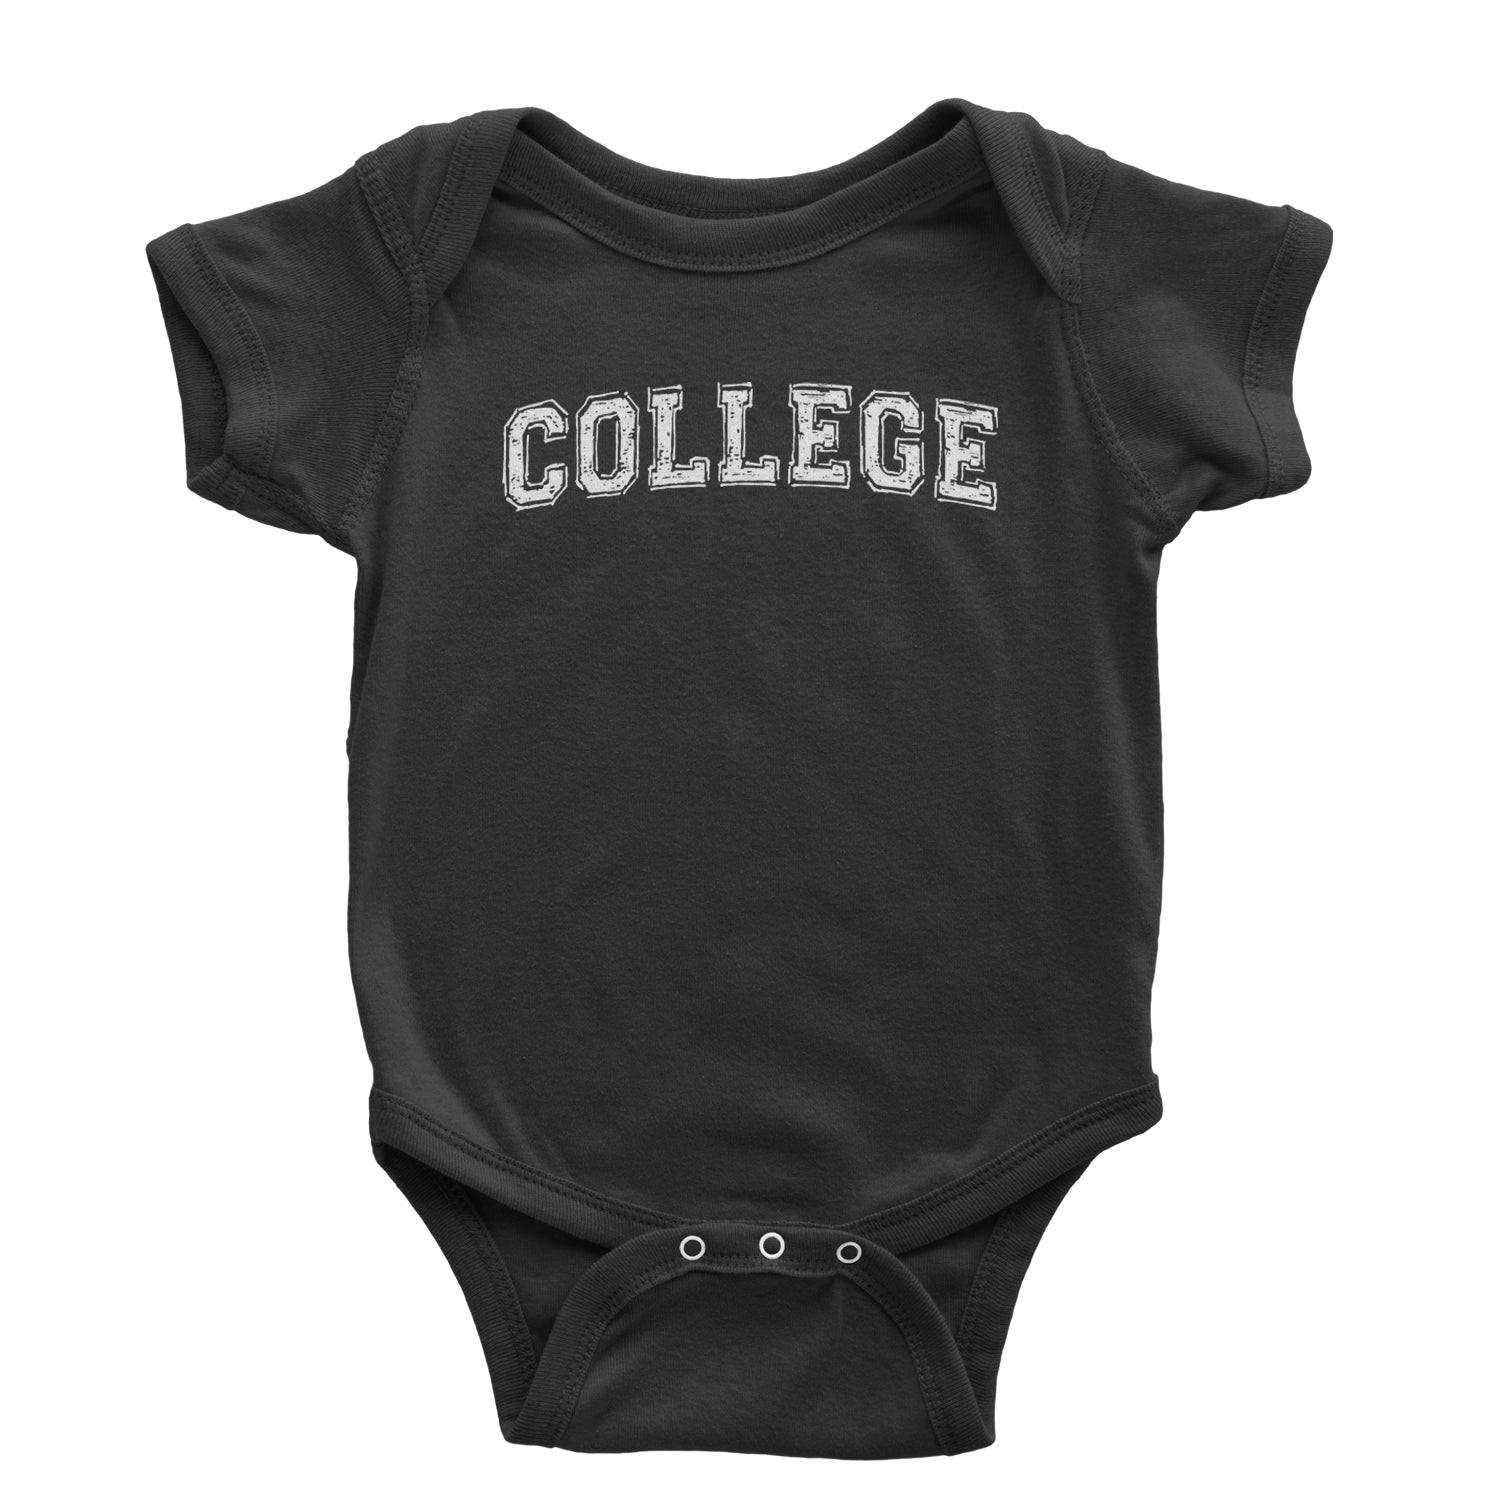 College Belushi Frat House Party Bluto Tribute Animal Infant One-Piece Romper Bodysuit and Toddler T-shirt